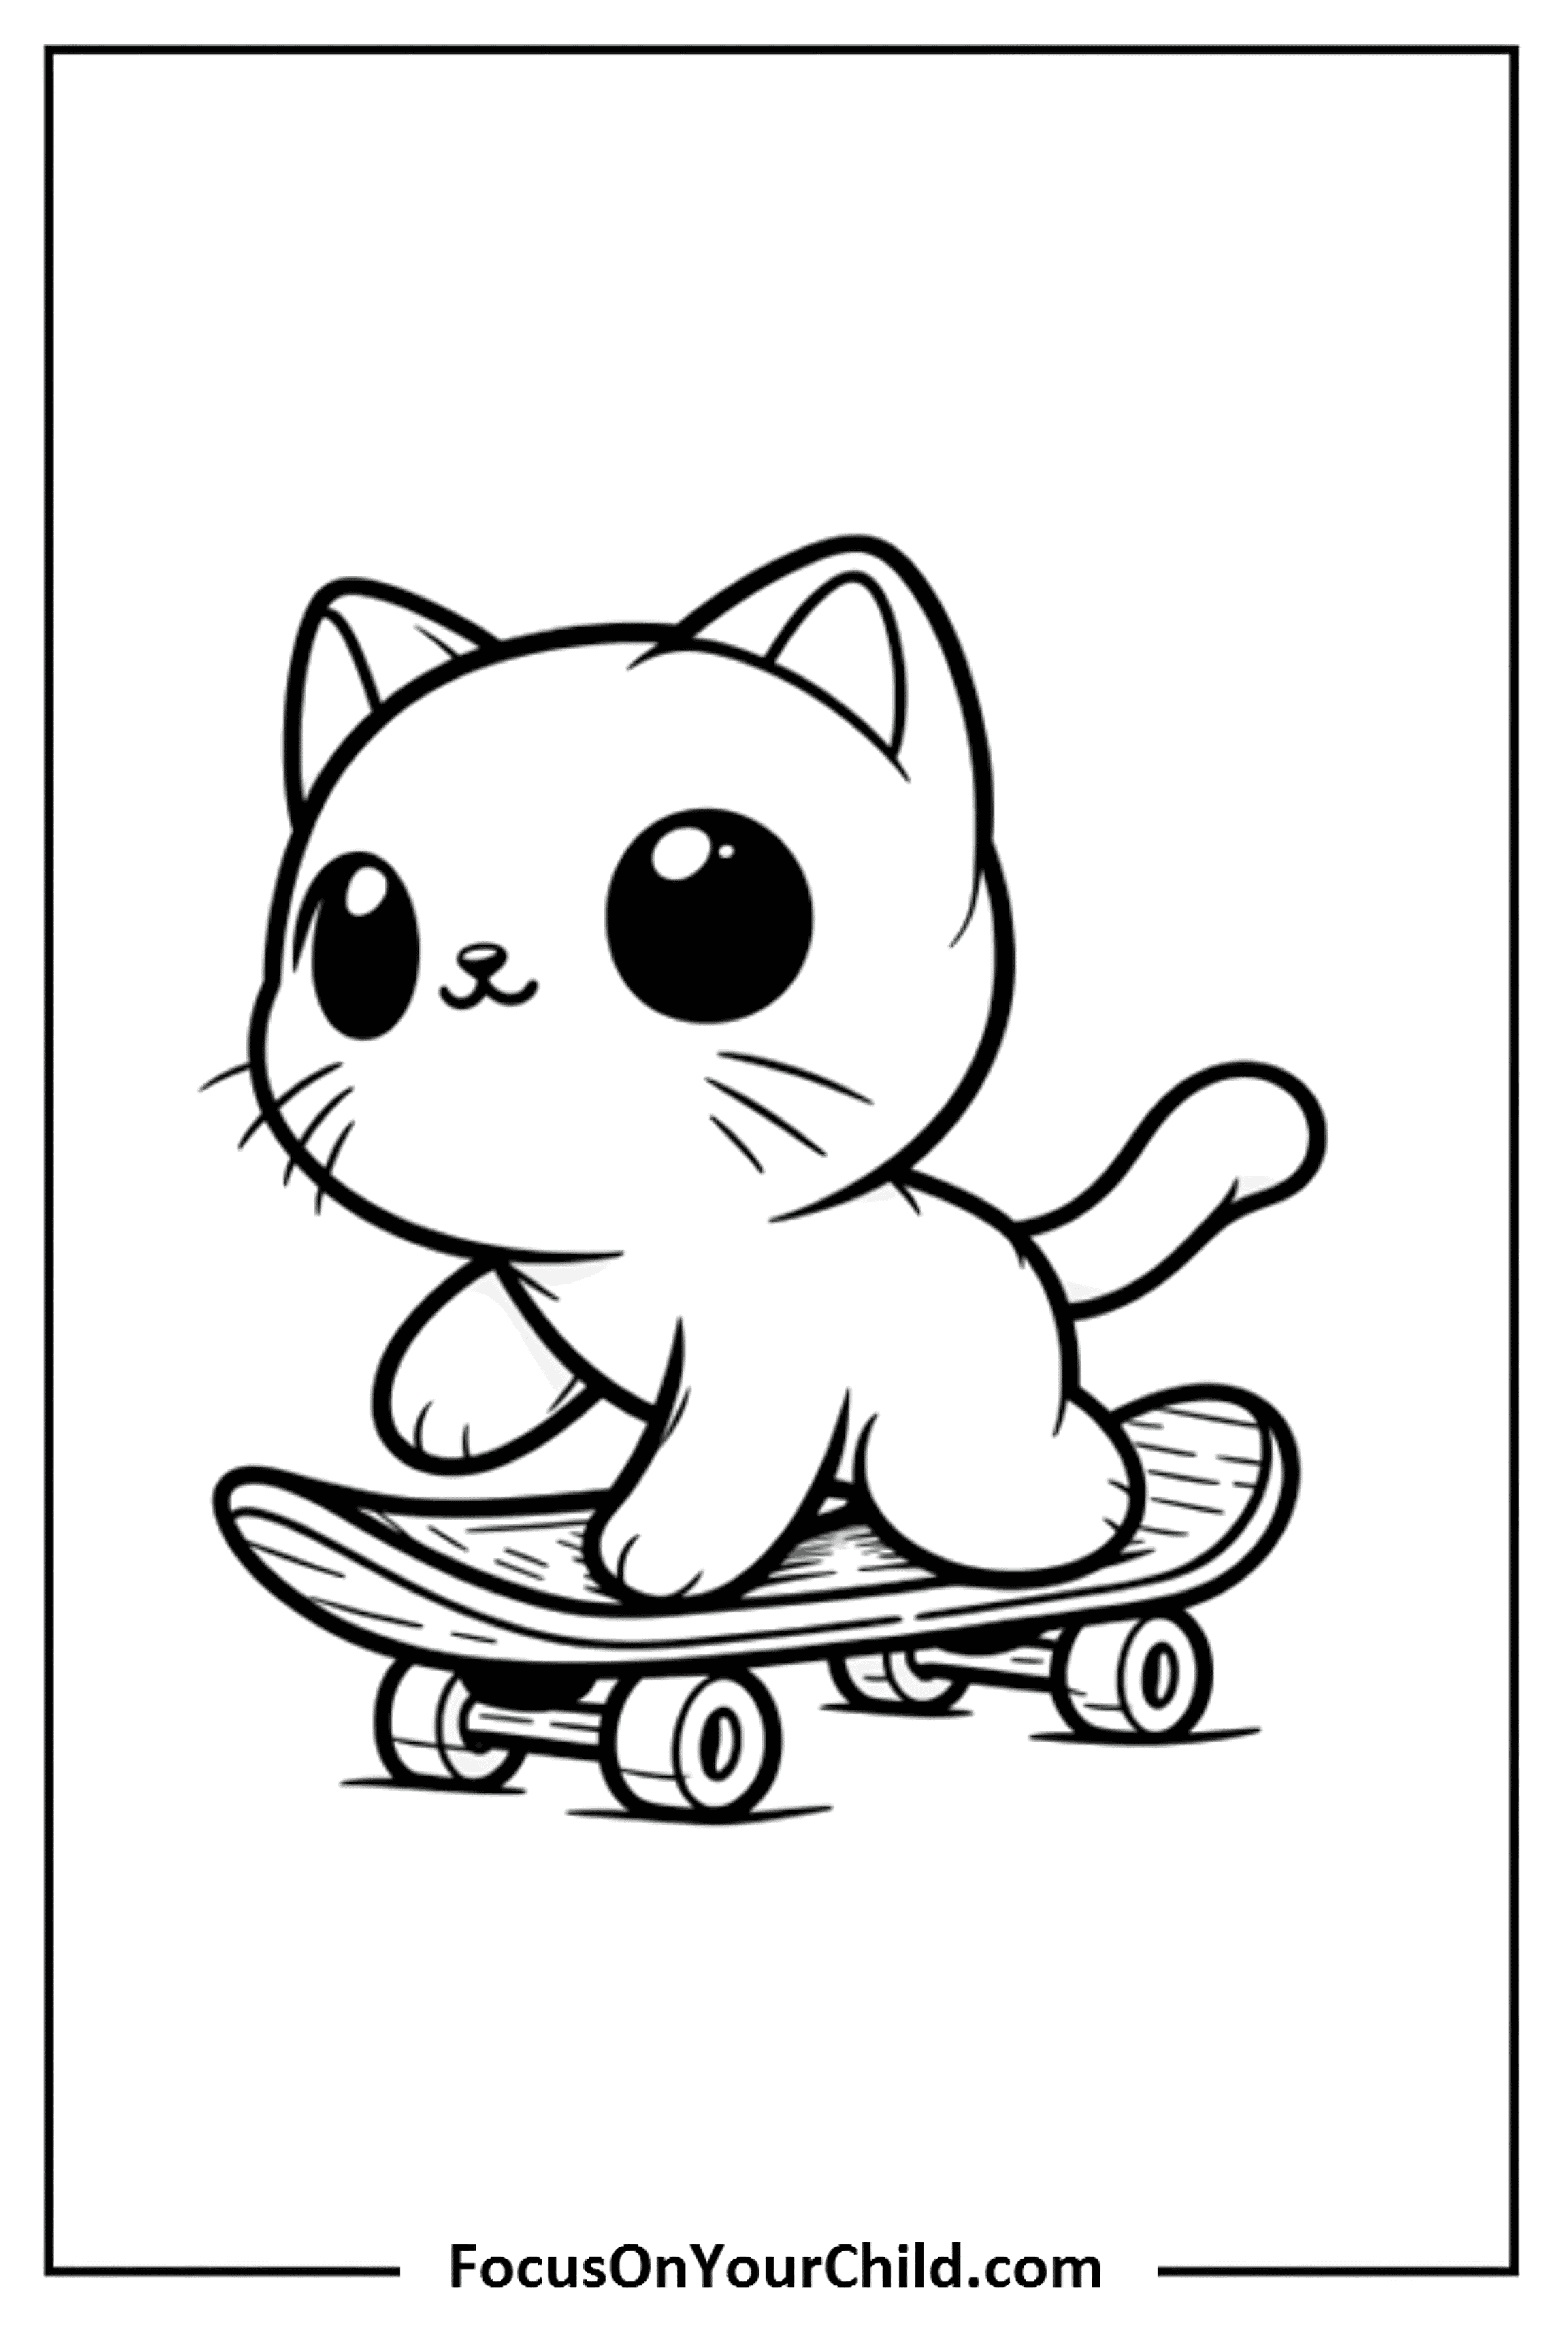 Adorable cat skateboarding, perfect for kids.